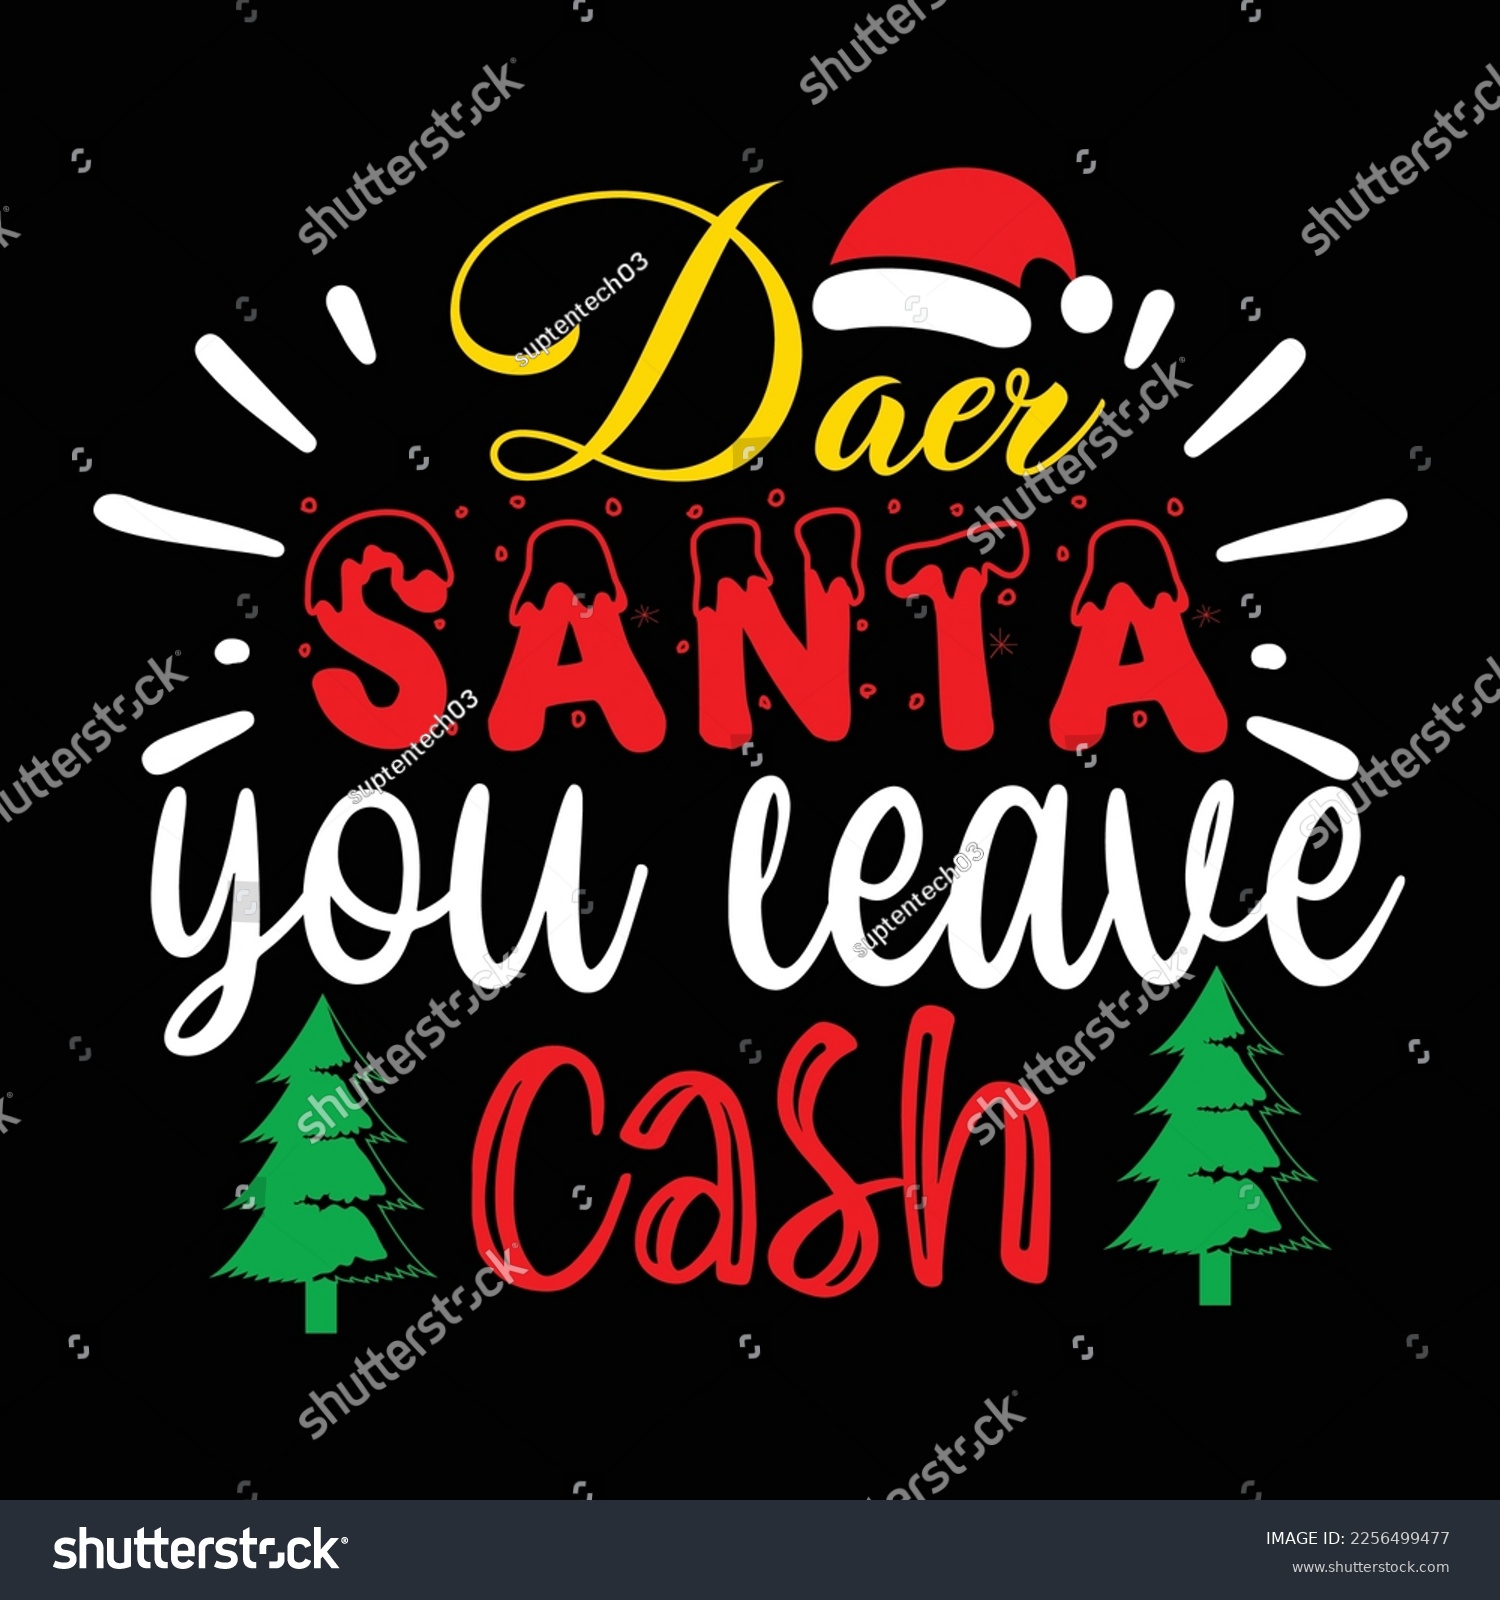 SVG of Dear Santa You Leave Cash, Merry Christmas shirts Print Template, Xmas Ugly Snow Santa Clouse New Year Holiday Candy Santa Hat vector illustration for Christmas hand lettered svg